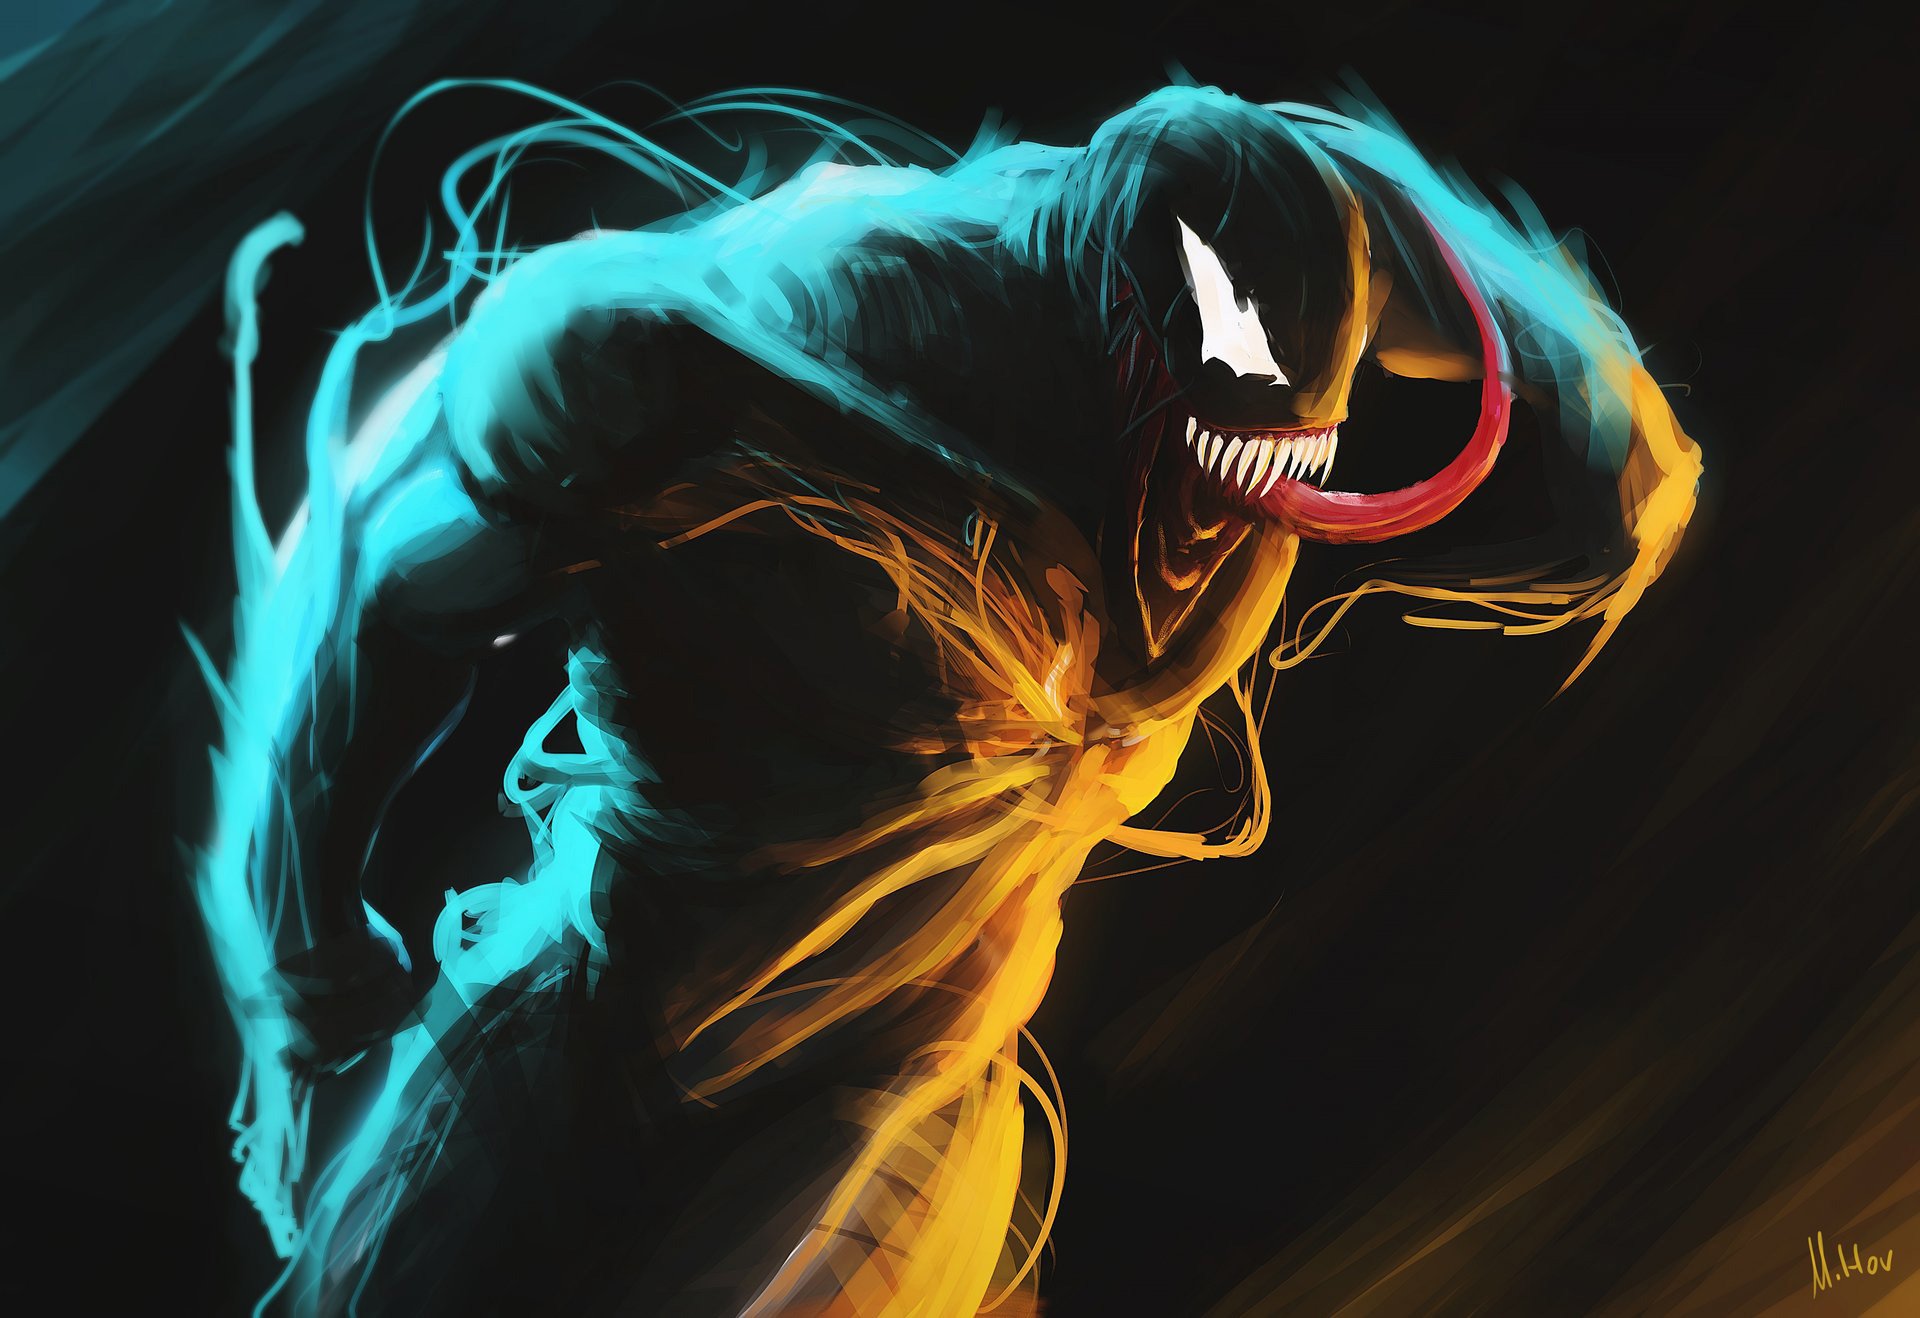 Venom Glowing Art, HD Superheroes, 4k Wallpaper, Image, Background, Photo and Picture